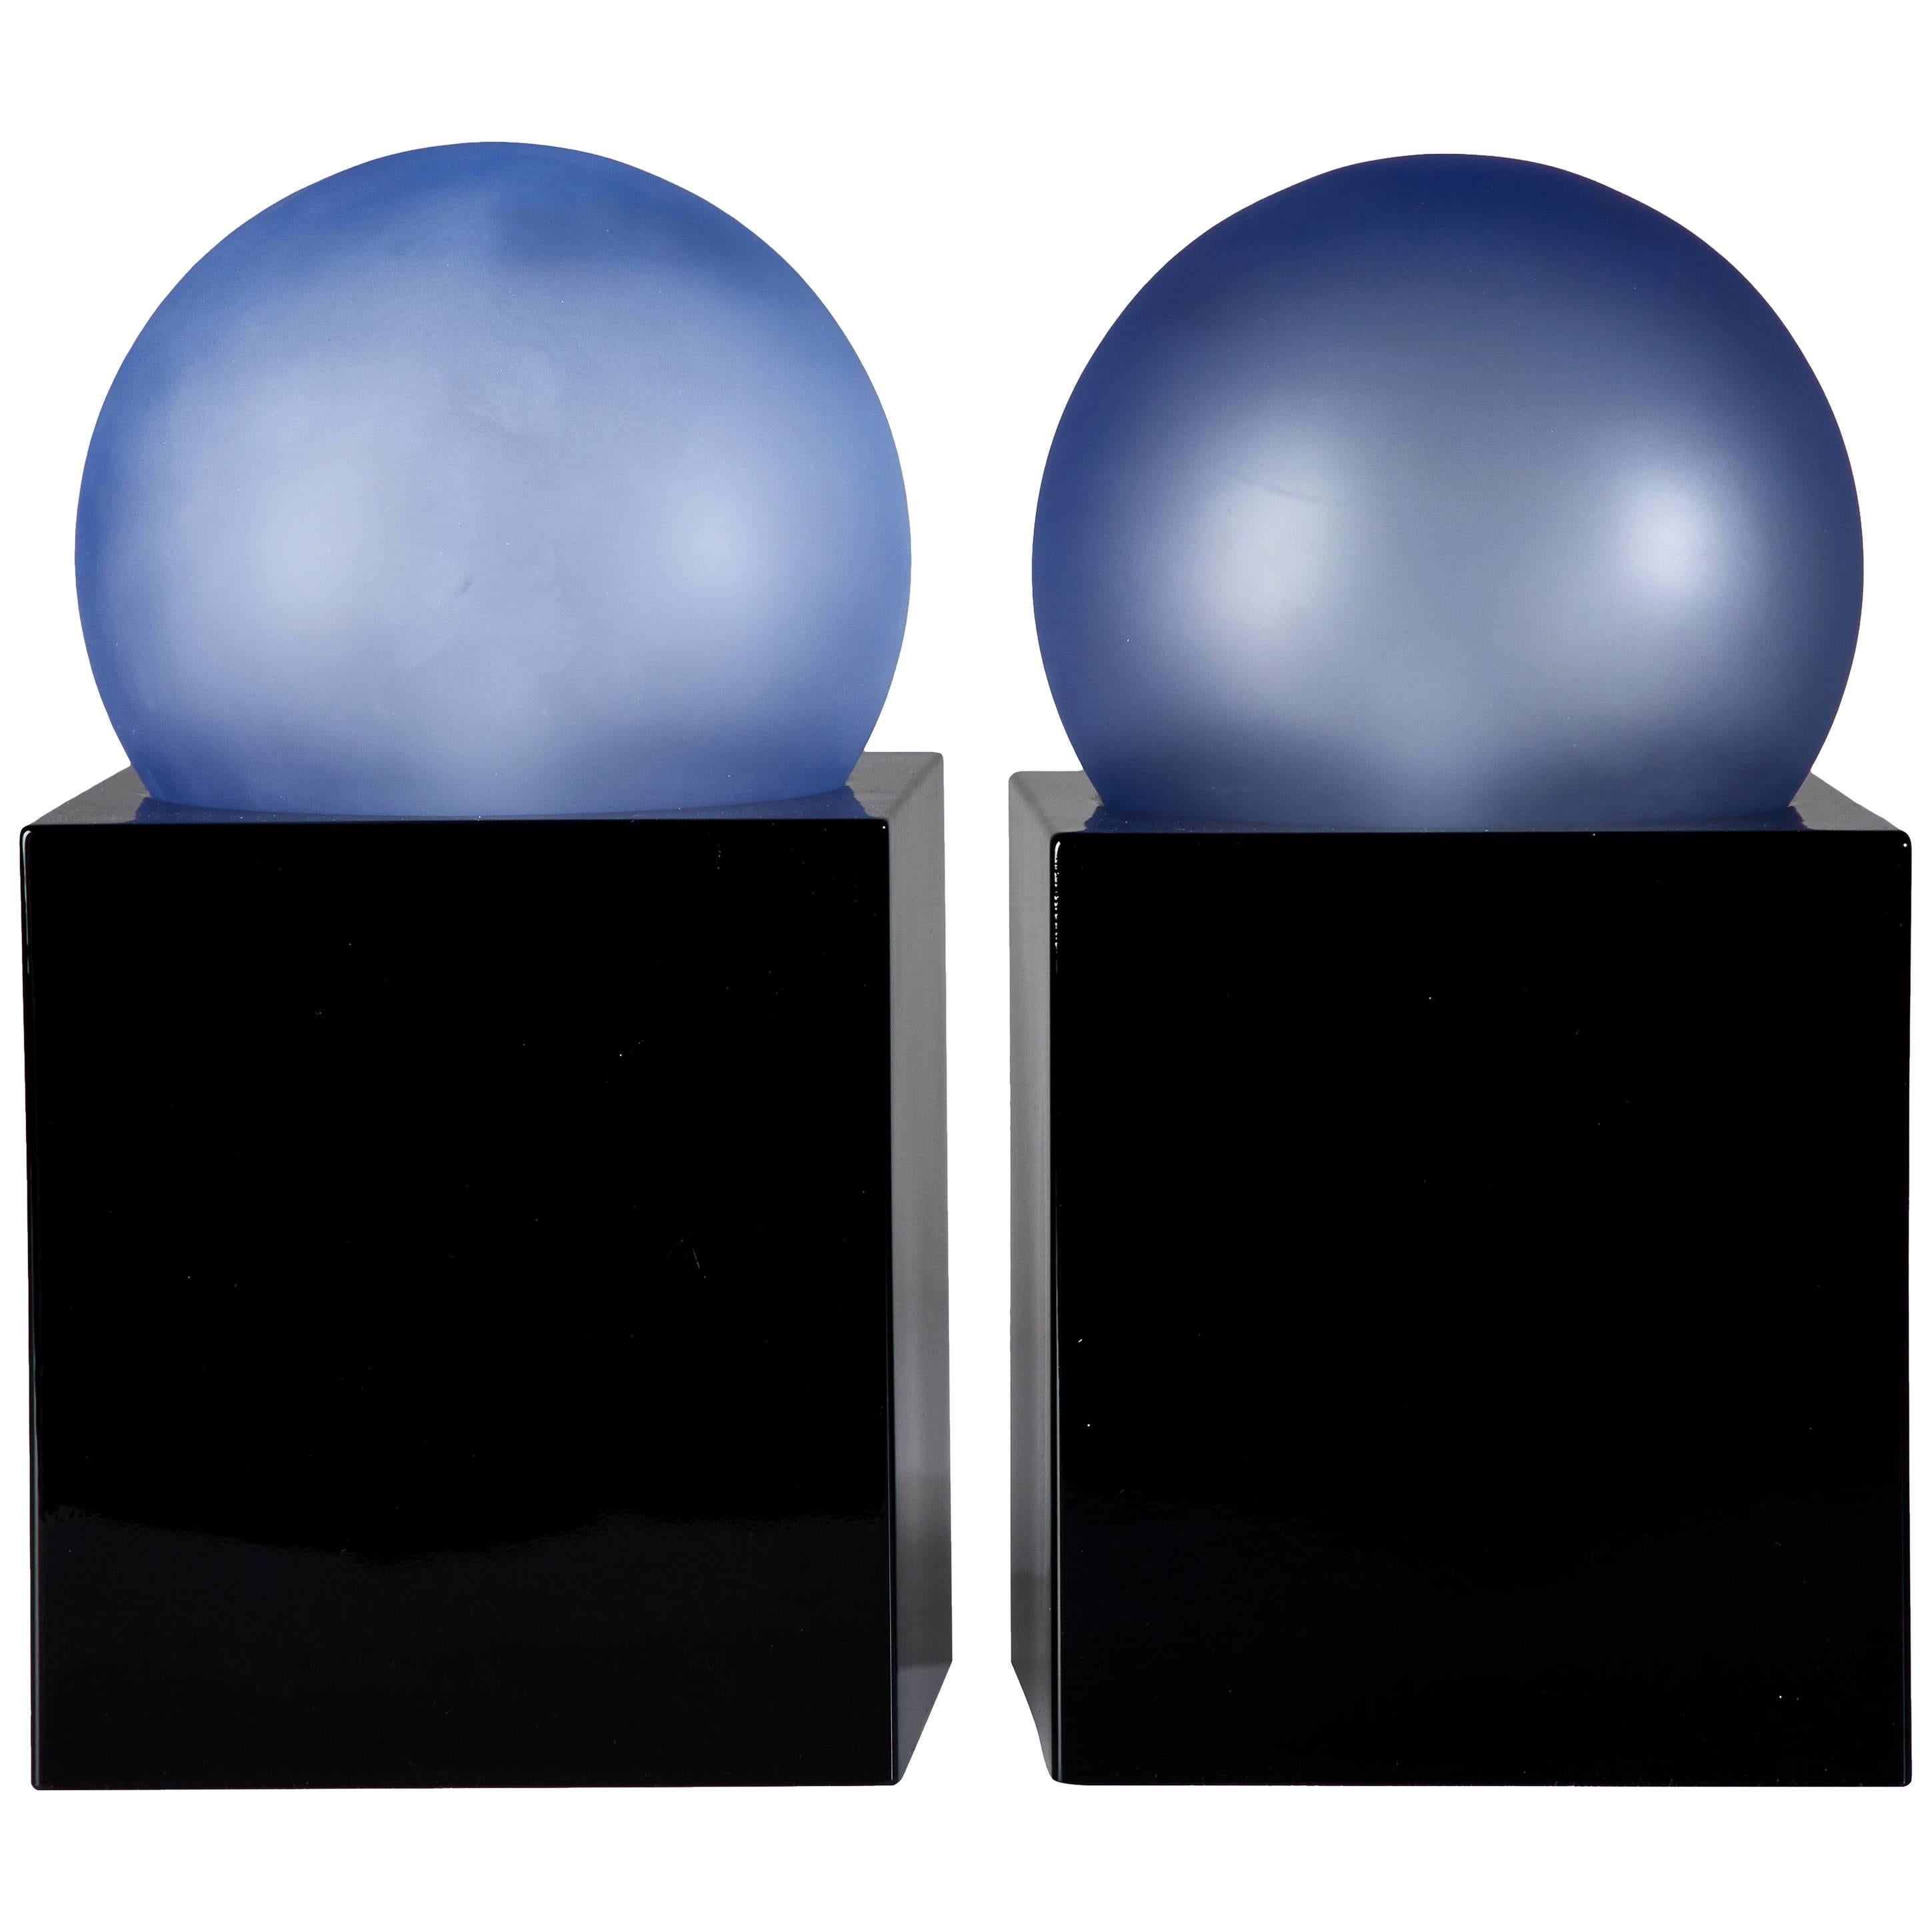 Pair of "Alba" Table Lamps by Ettore Sotsass for Enel